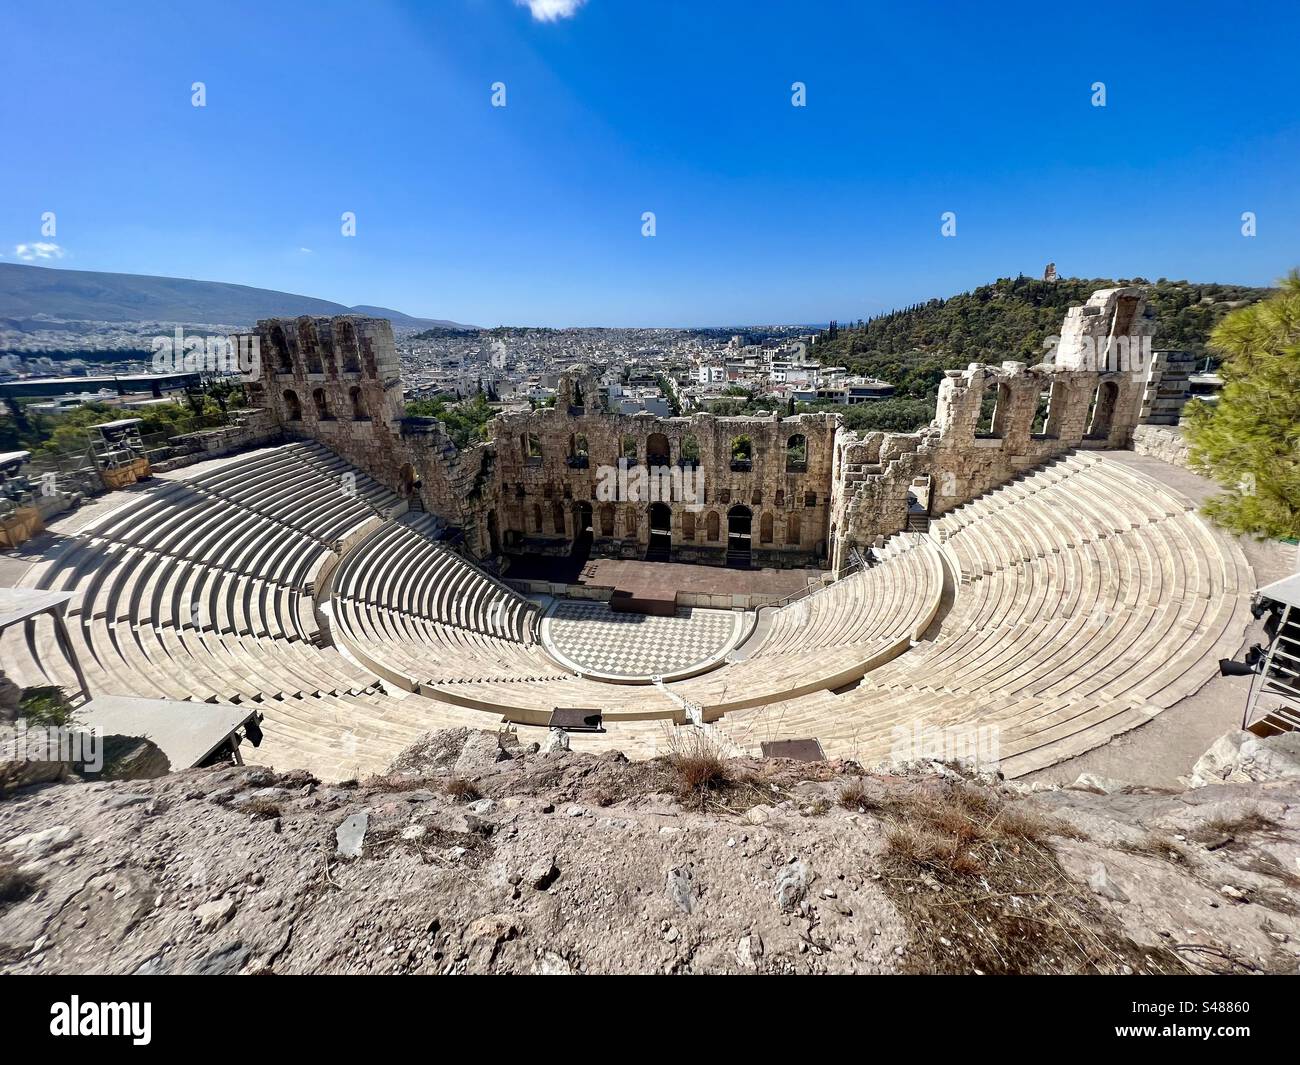 The Odeon of Herodes Atticus is an ancient amphitheater in the Acropolis that today is still host to live theater performance. Stock Photo